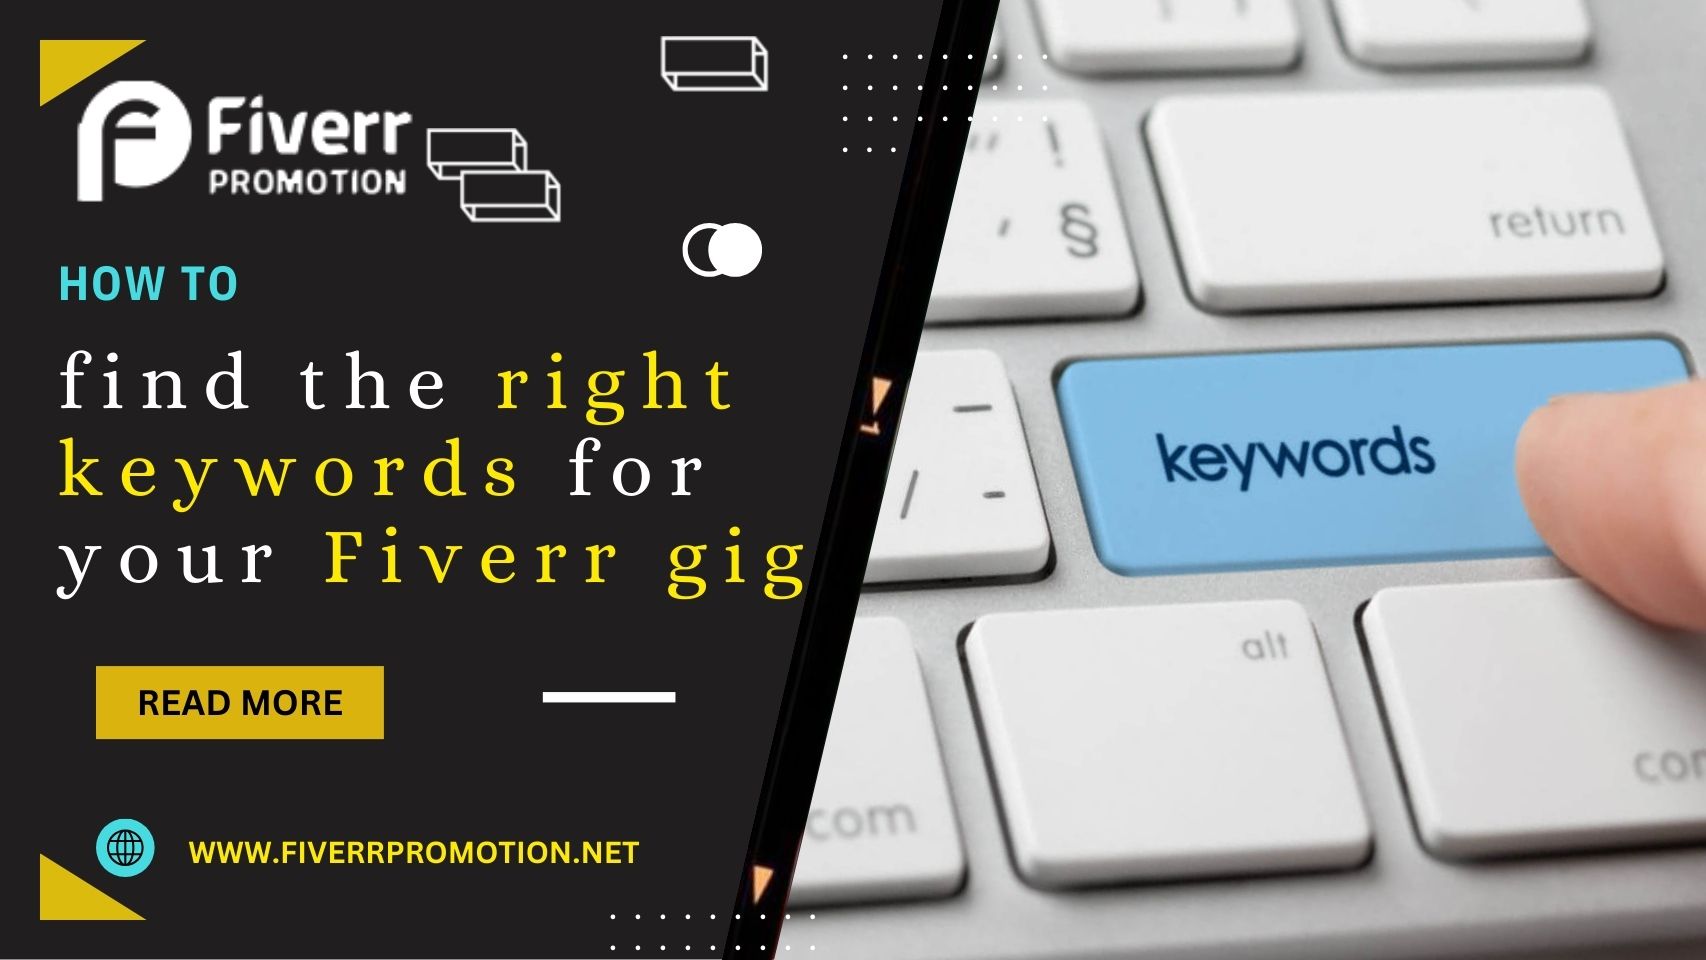 How to find the right keywords for your Fiverr gig